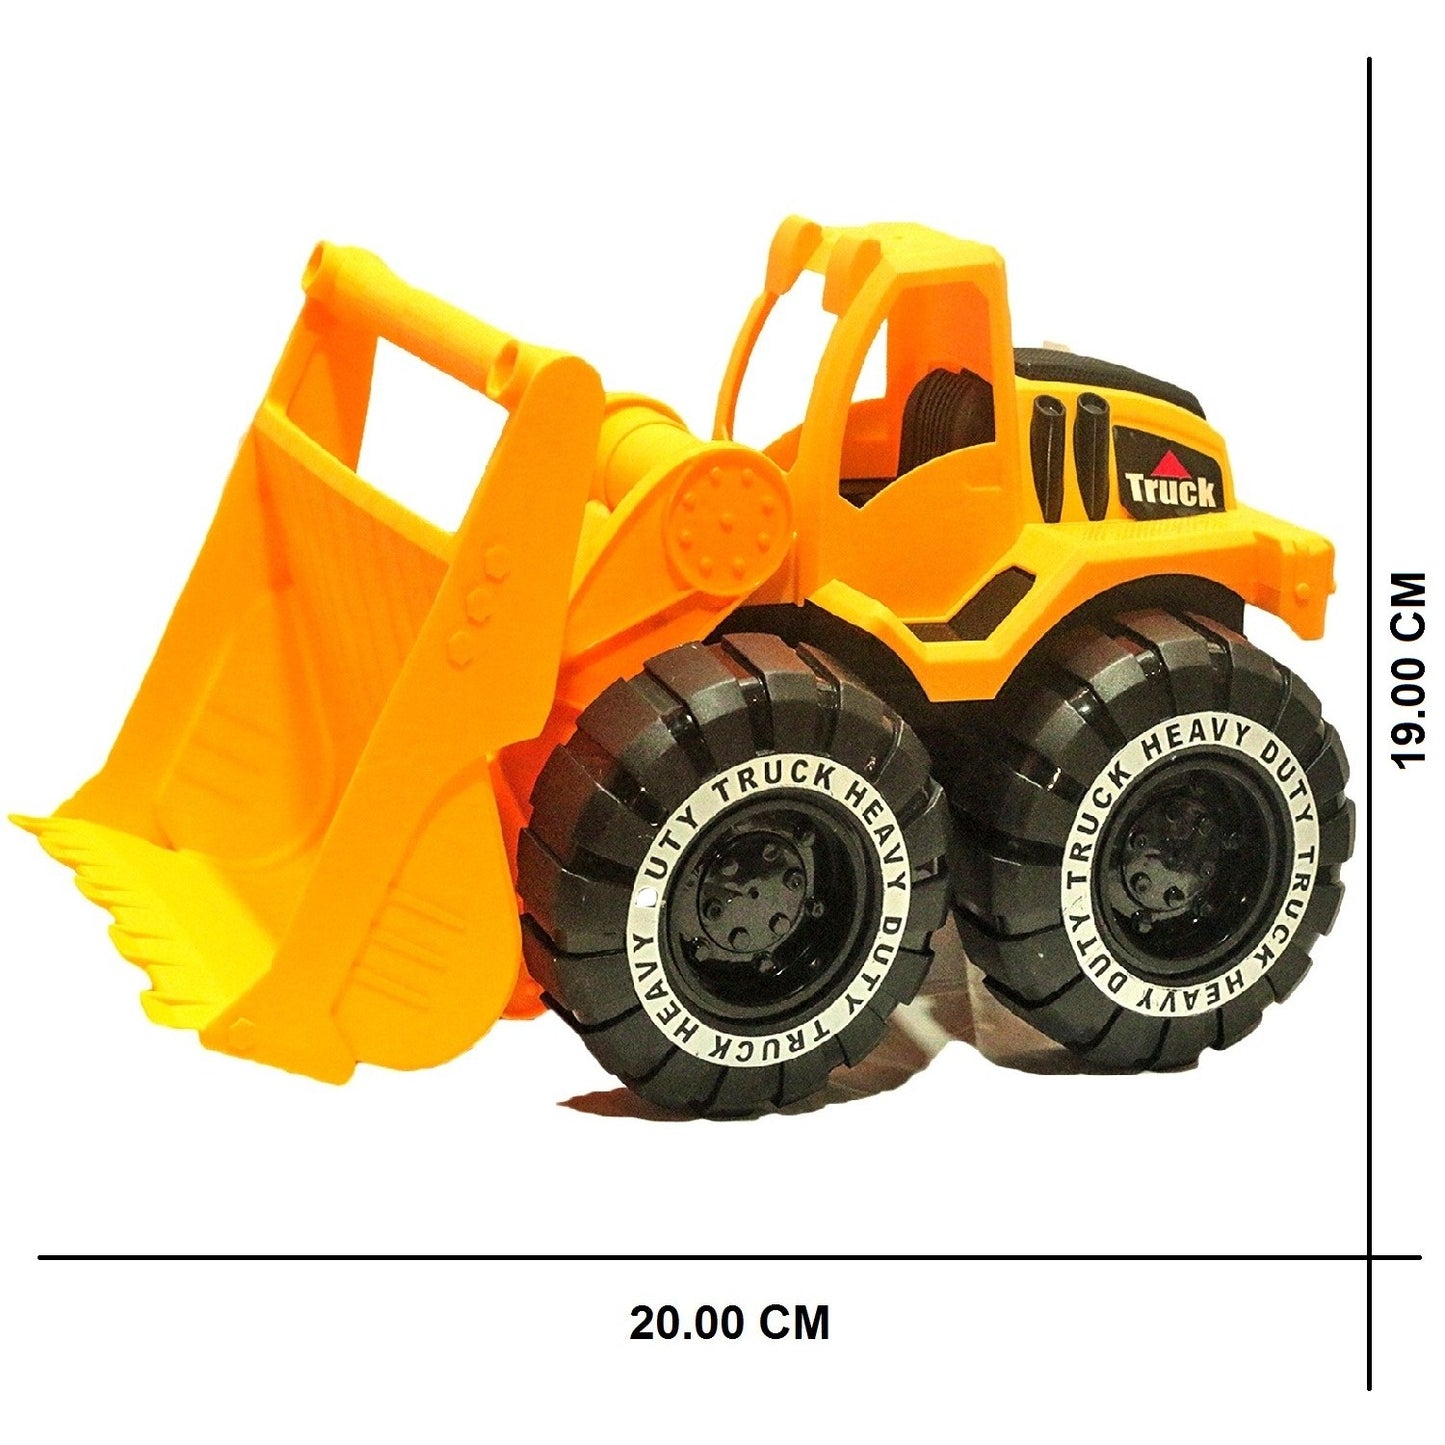 High Quality Friction Powered Big Bulldozer and Excavator Toy for Kids (Yellow, Large) (Second Edition)